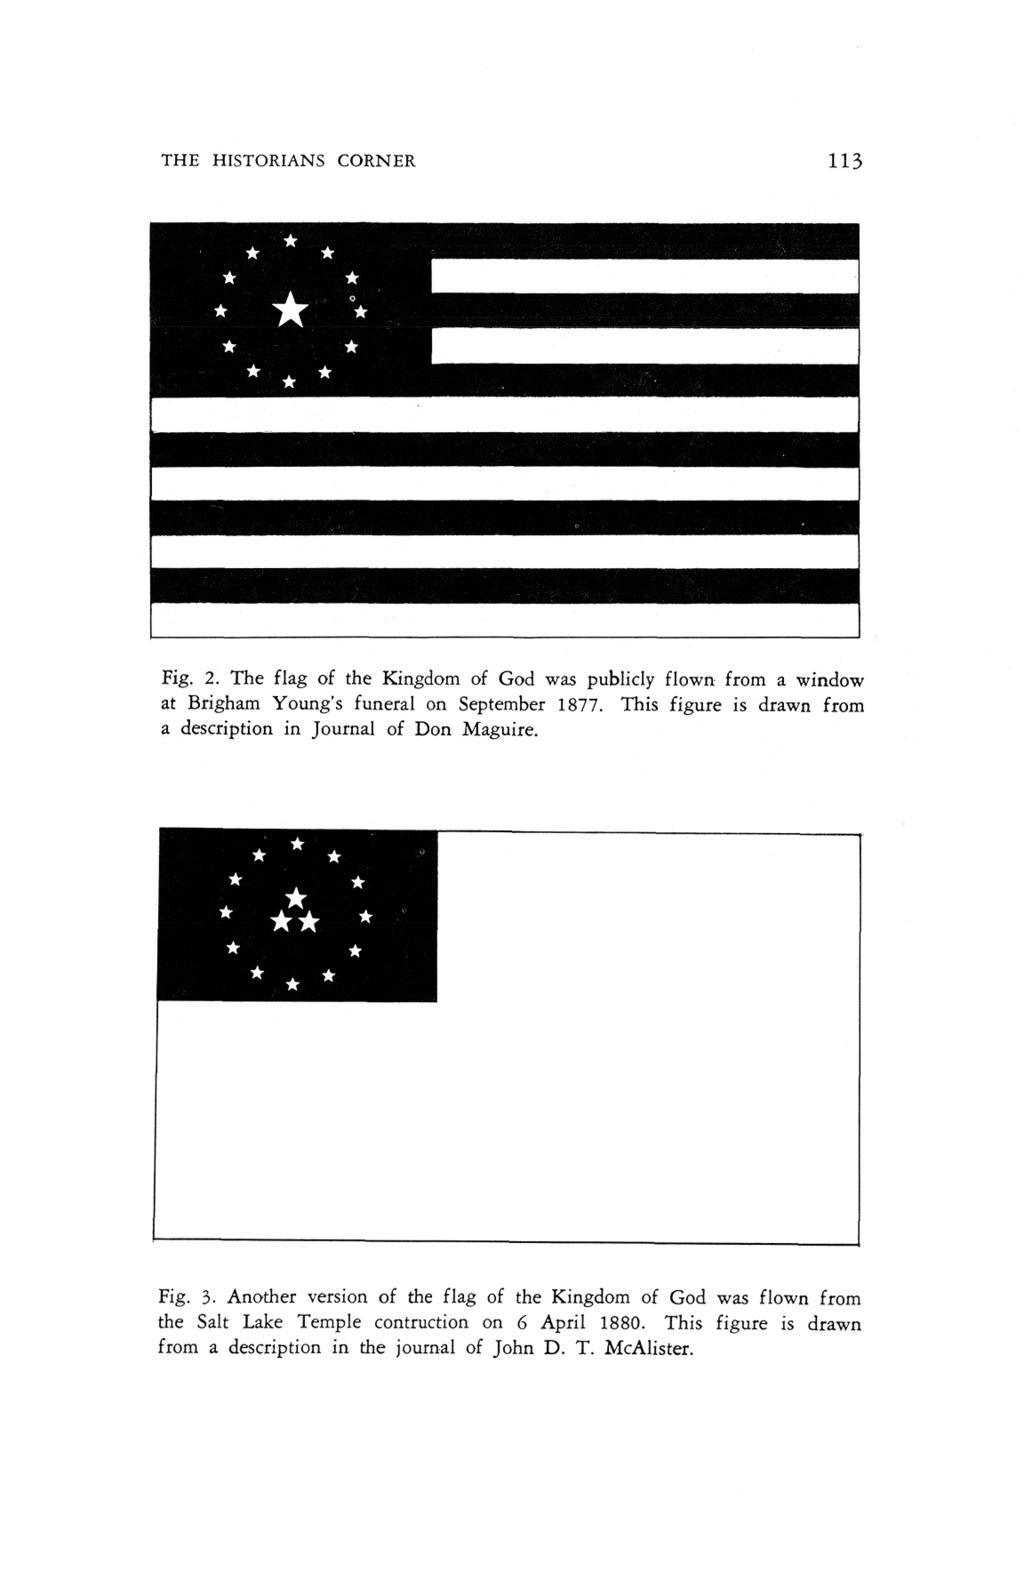 Quinn: The Flag of the Kingdom of God THE historians CORNER 113 fig 2 the flag of the kingdom of god was publicly flown from a window at brigham youngs funeral on september 1877 this ibis figure is